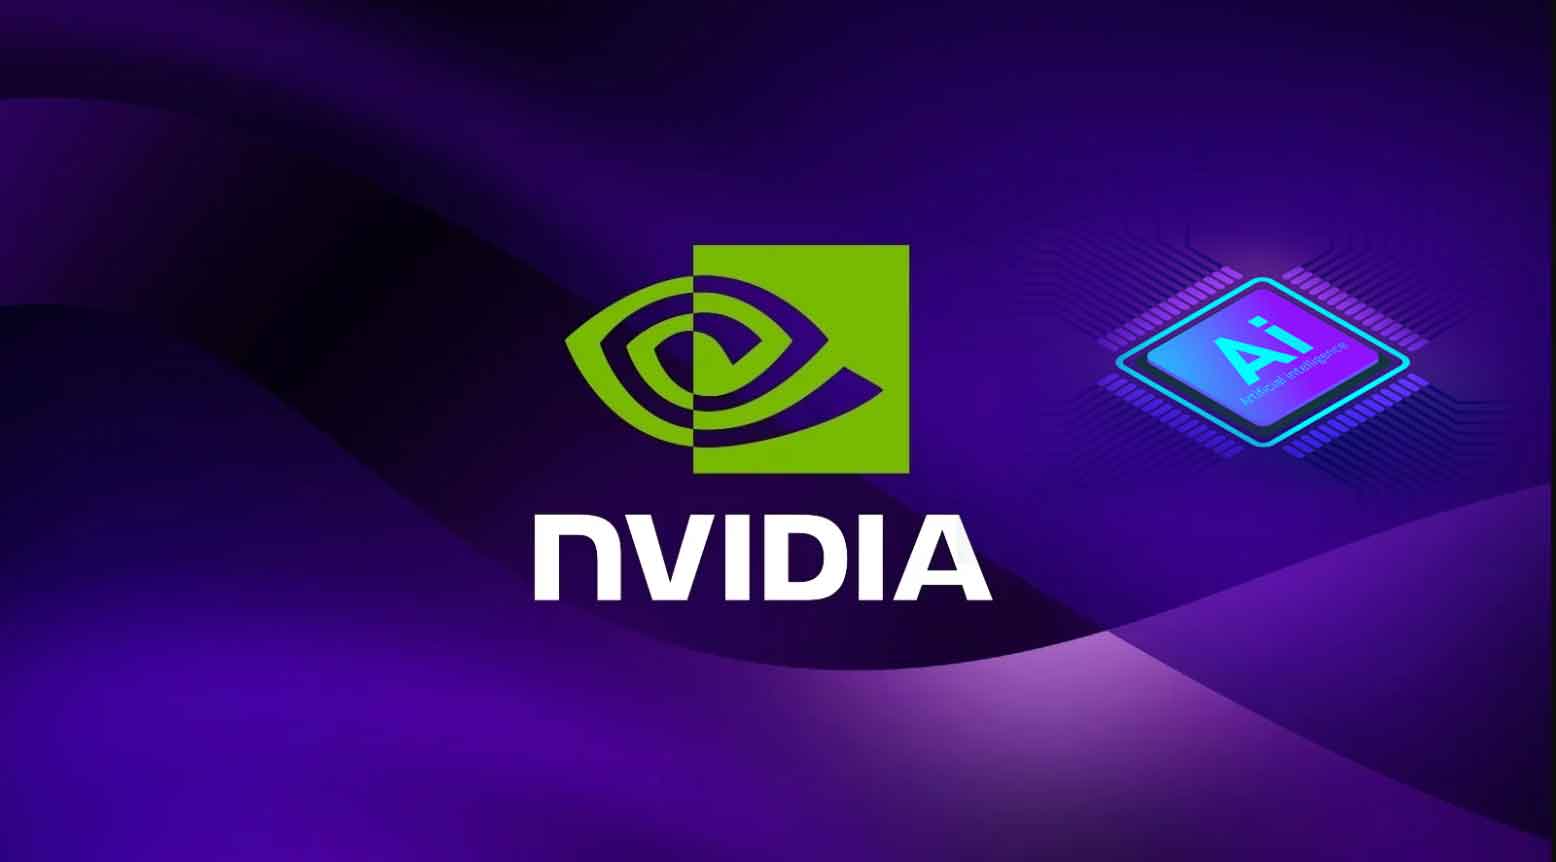 Nvidia Launches New AI Chip Configuration to Speed Generative AI Applications.